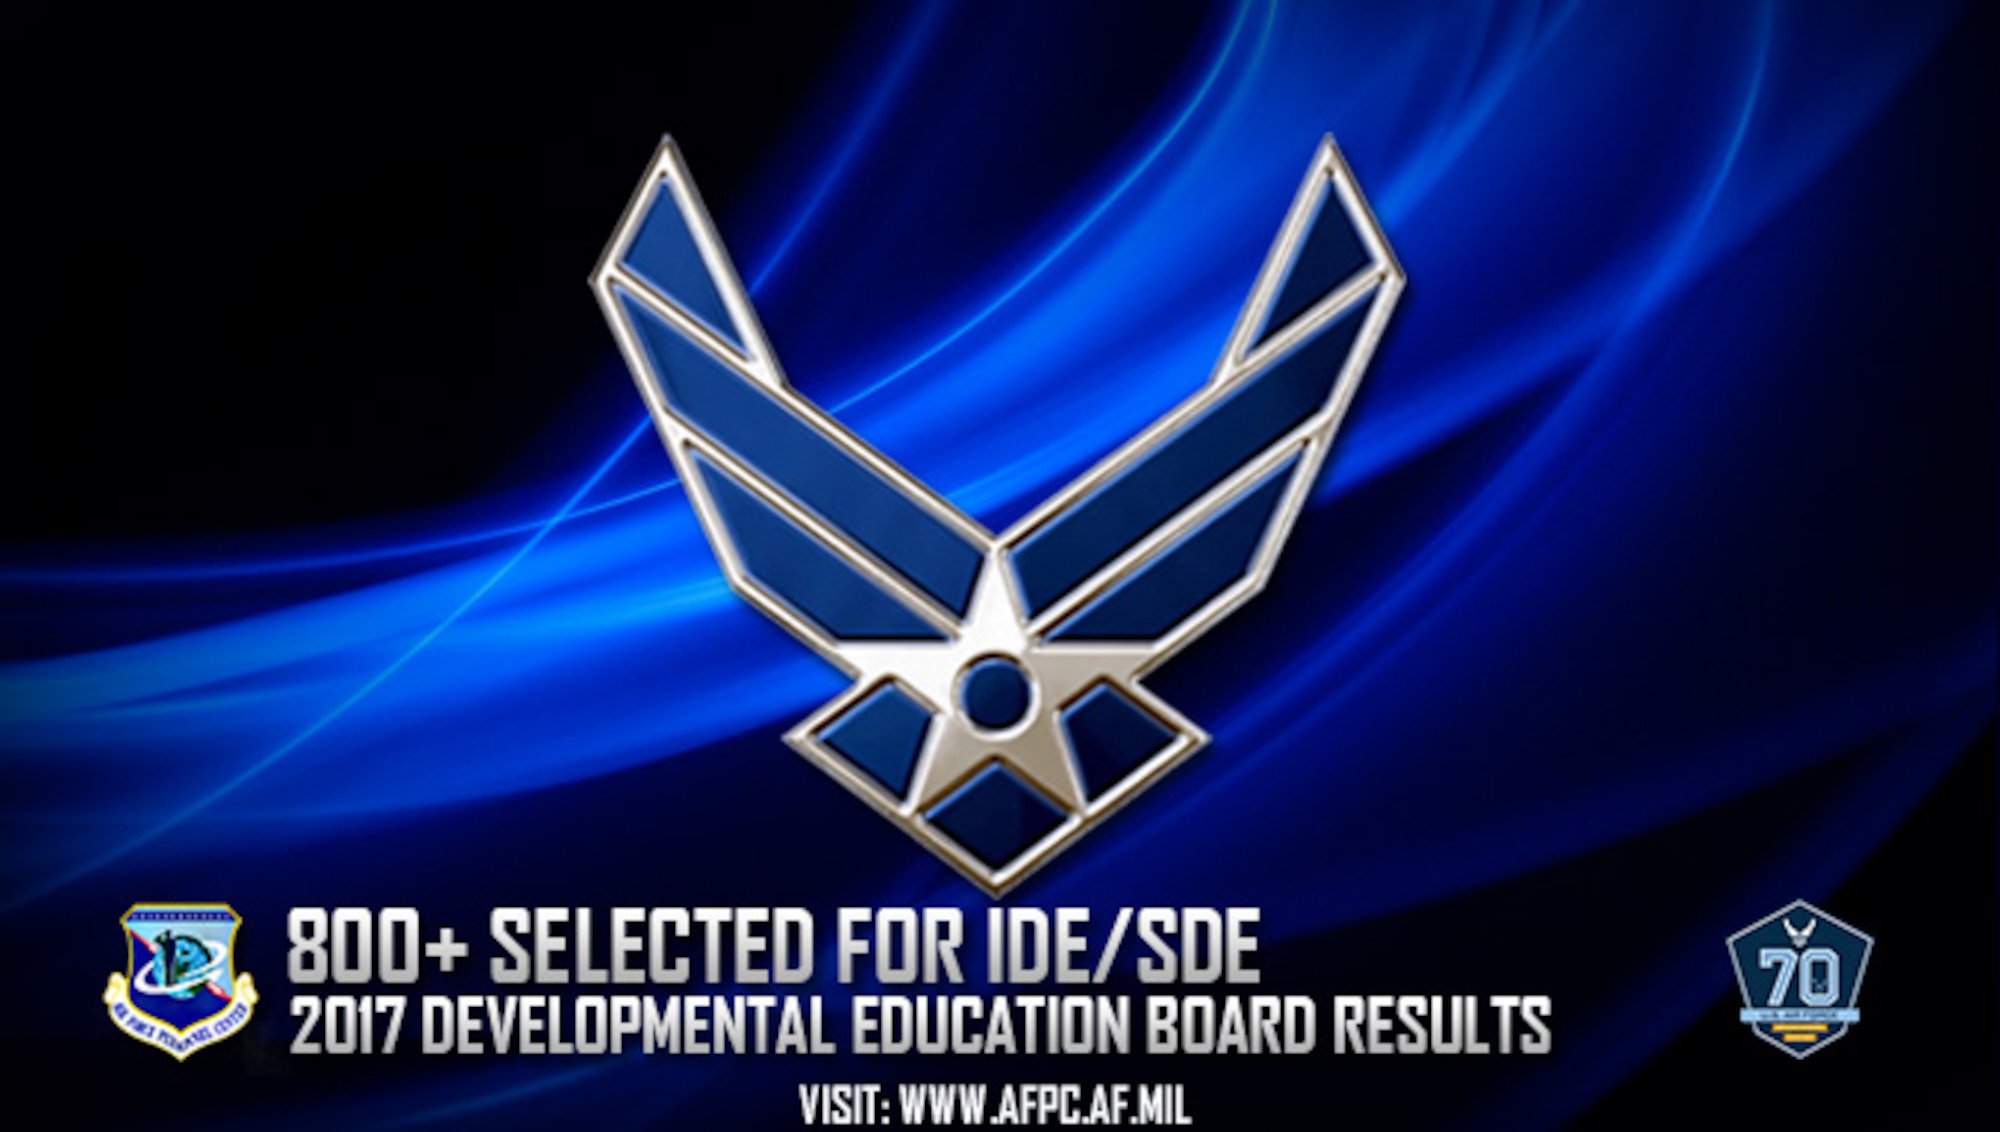 Officers selected for developmental education opportunities will attend intermediate- and senior-level development programs such as Air Command and Staff College, Air War College, National War College and more. (U.S. Air Force graphic)